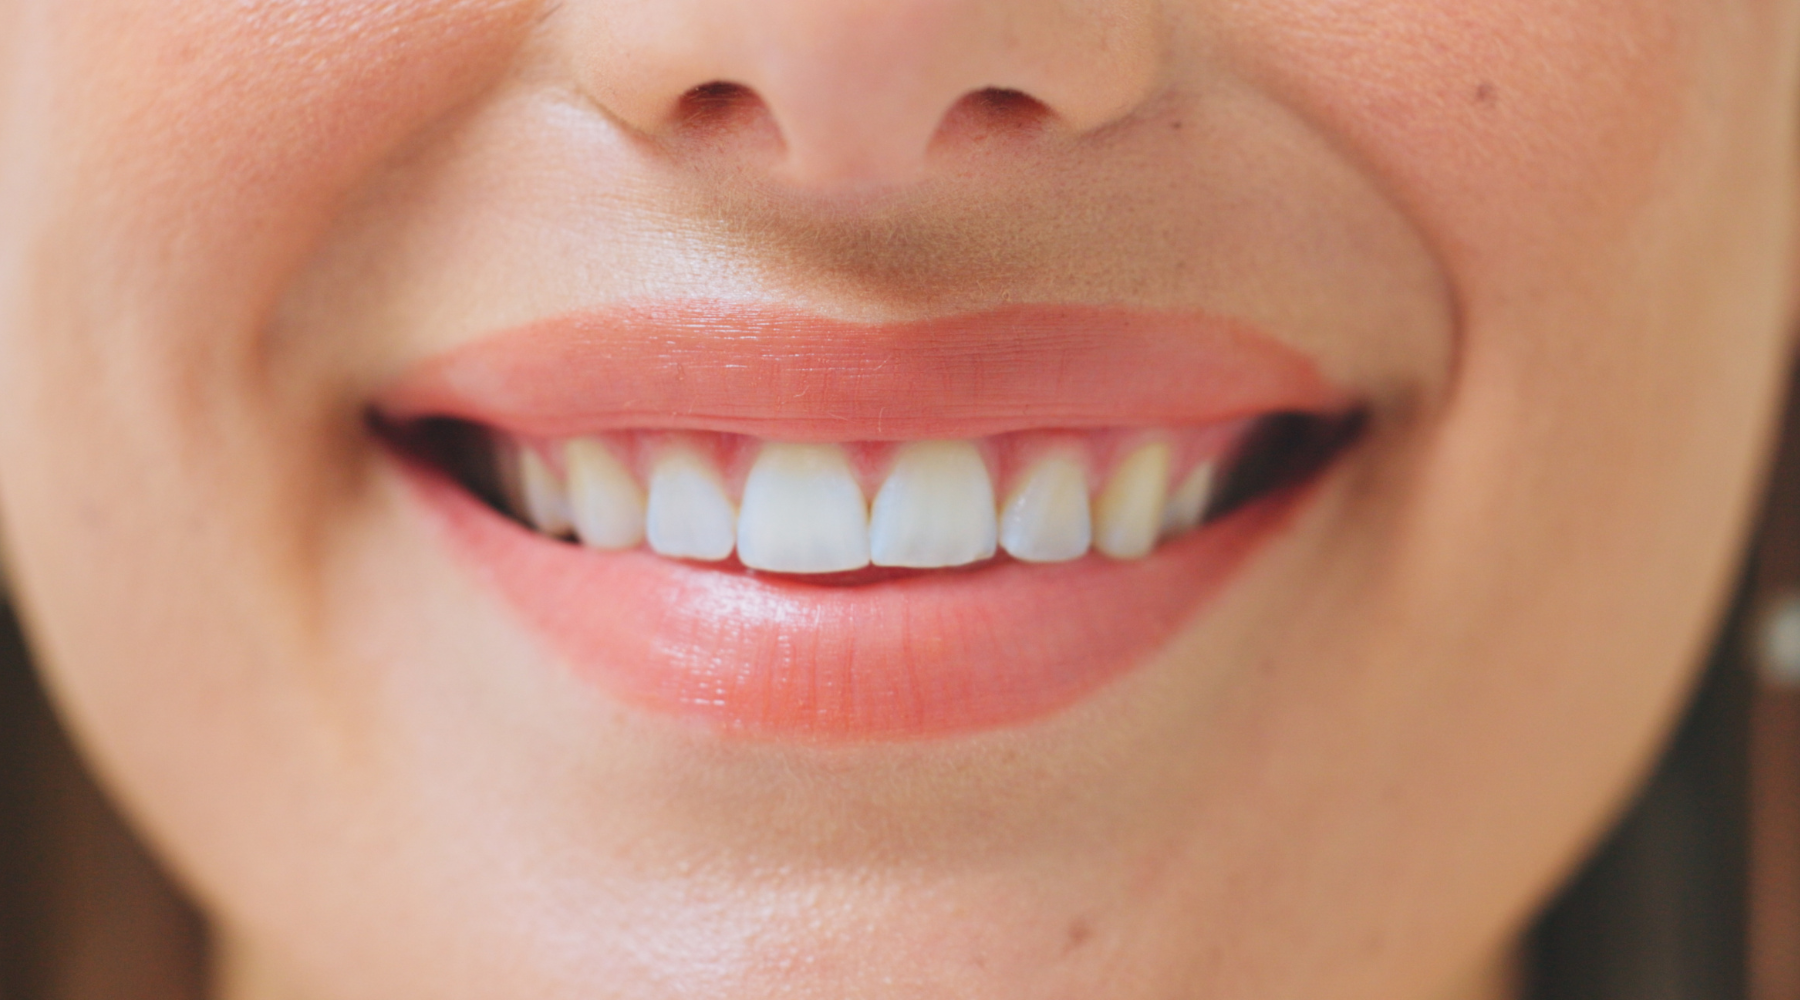 How To Whiten Your Teeth Naturally and Tips to Keep Your Smile Bright